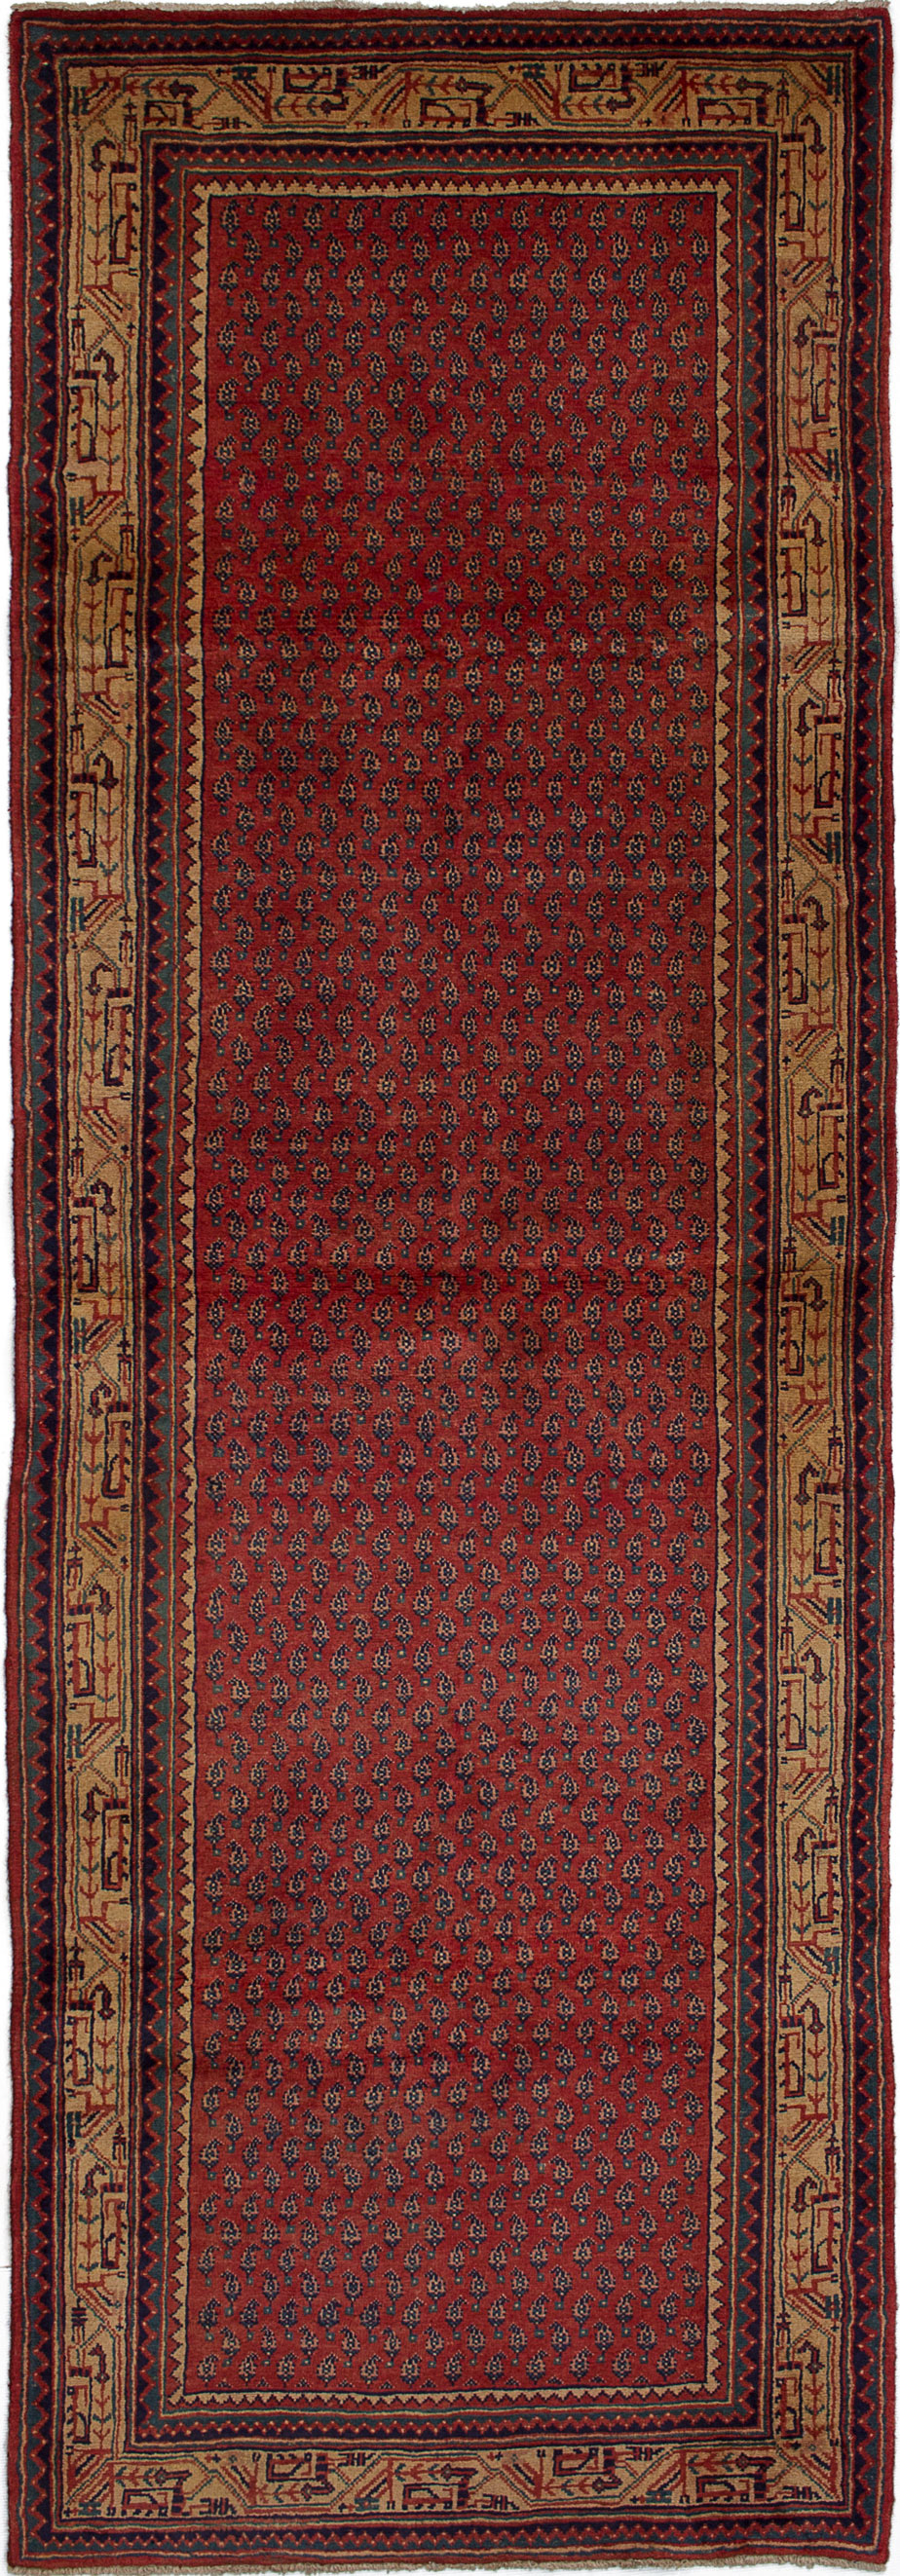 Hand-knotted Arak Red Wool Rug 3'7" x 10'4"  Size: 3'7" x 10'4"  